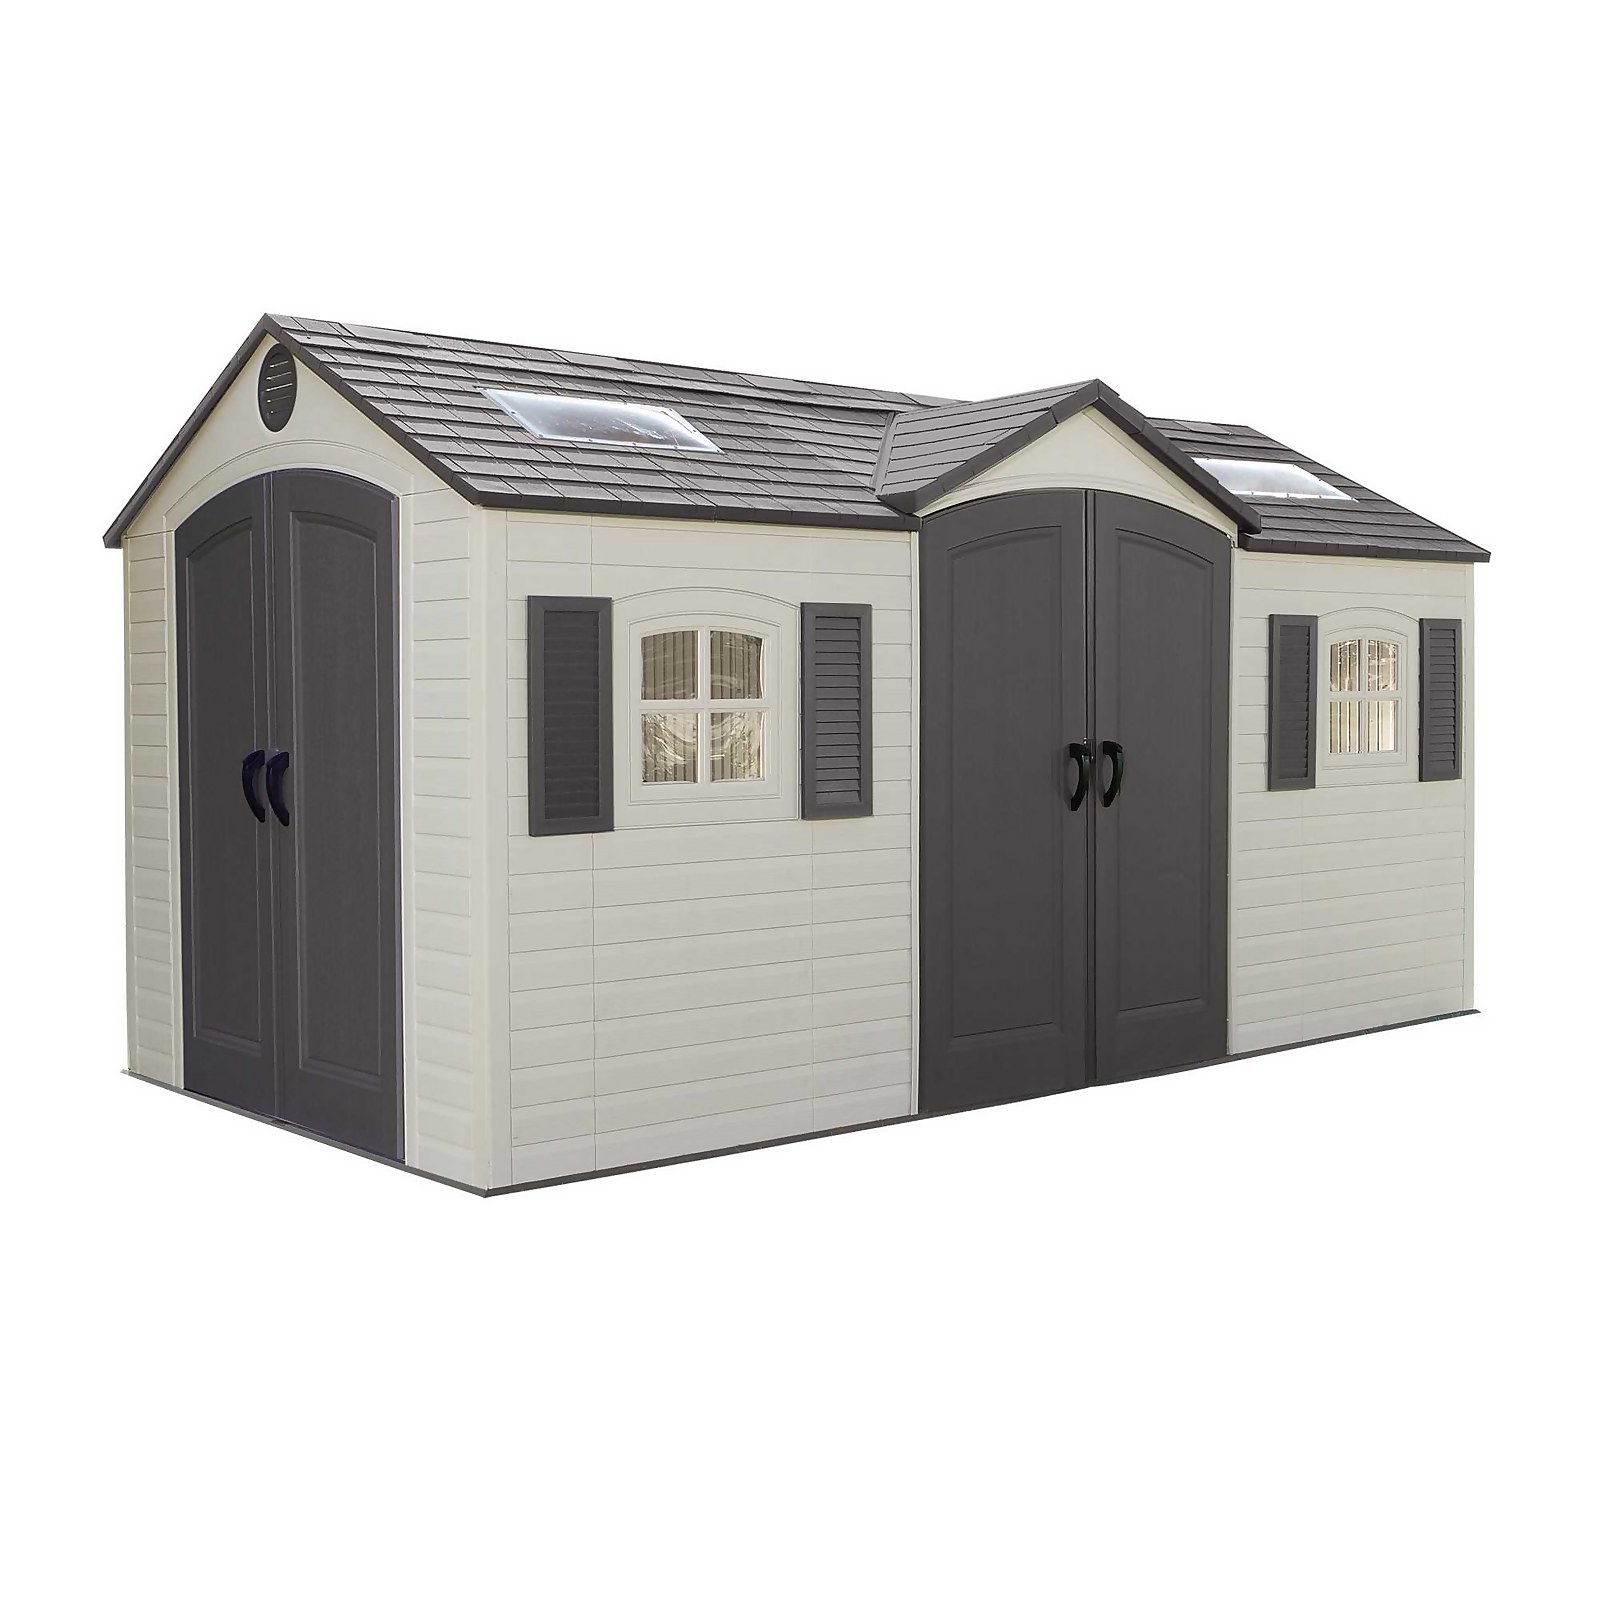 Lifetime 15x8 ft Outdoor Storage Shed